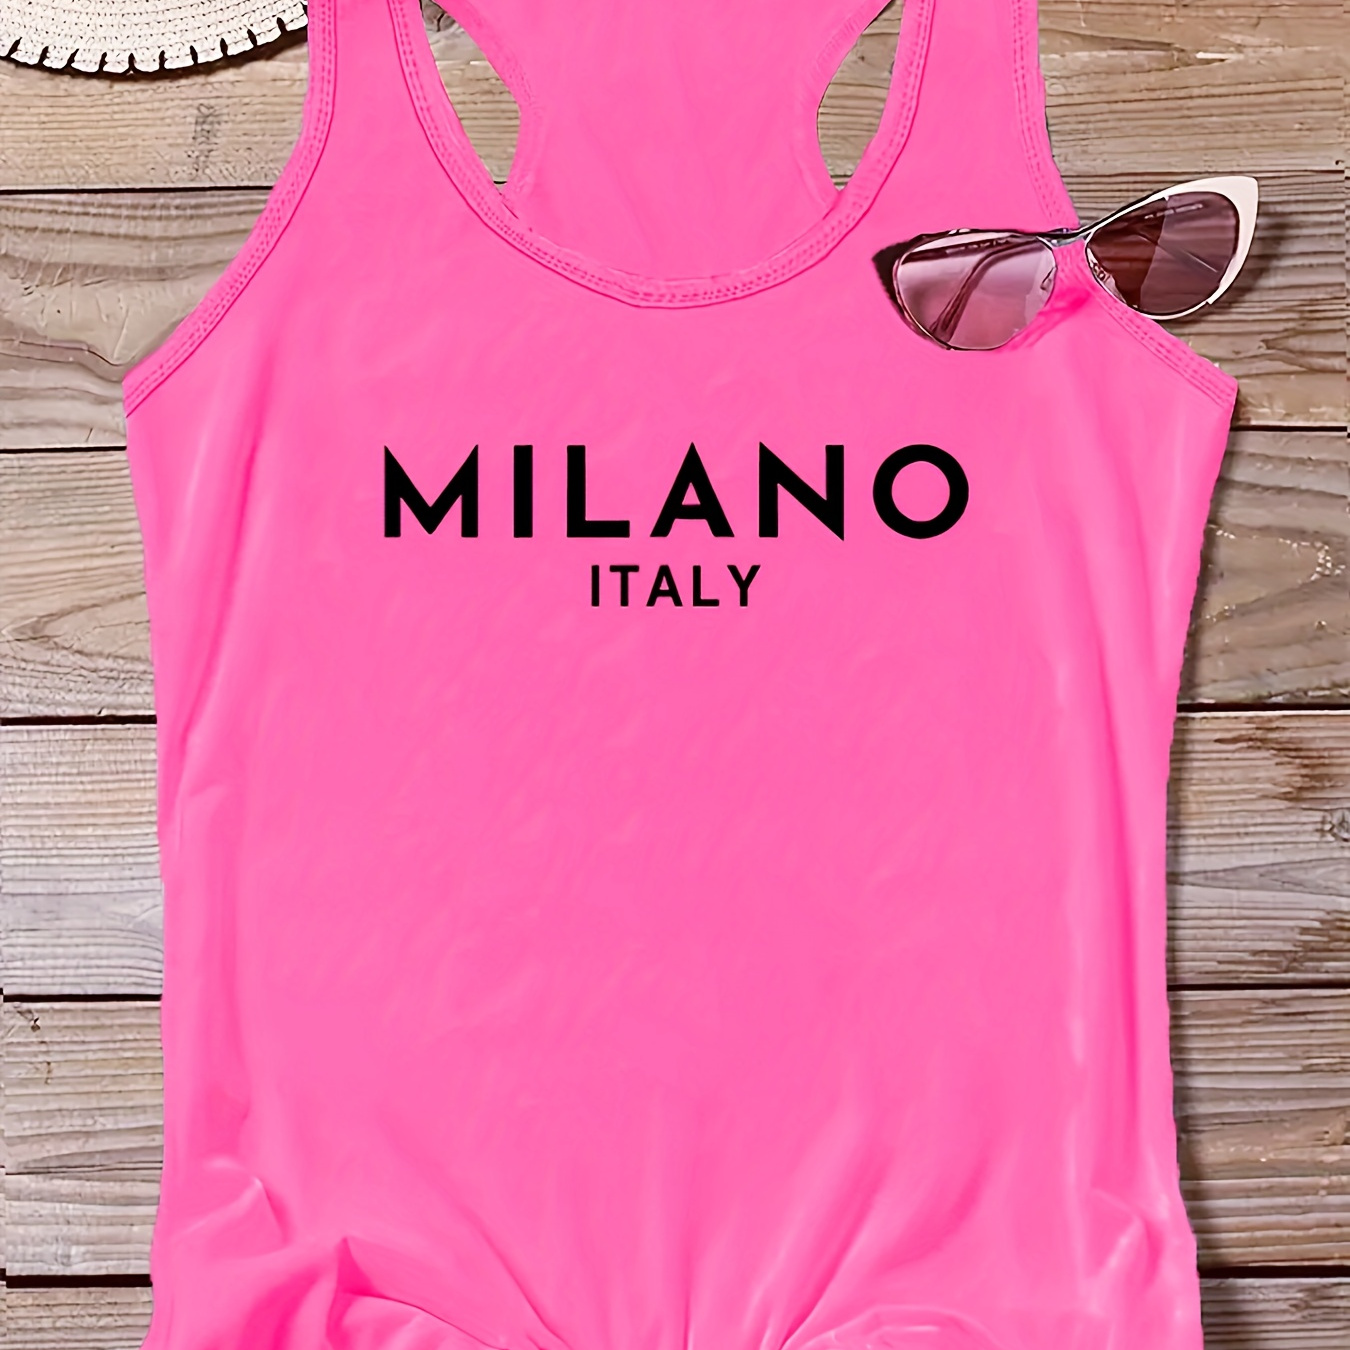 

Plus Size Milano Print Tank Top, Casual Crew Neck Sleeveless Top For Summer, Women's Plus Size Clothing